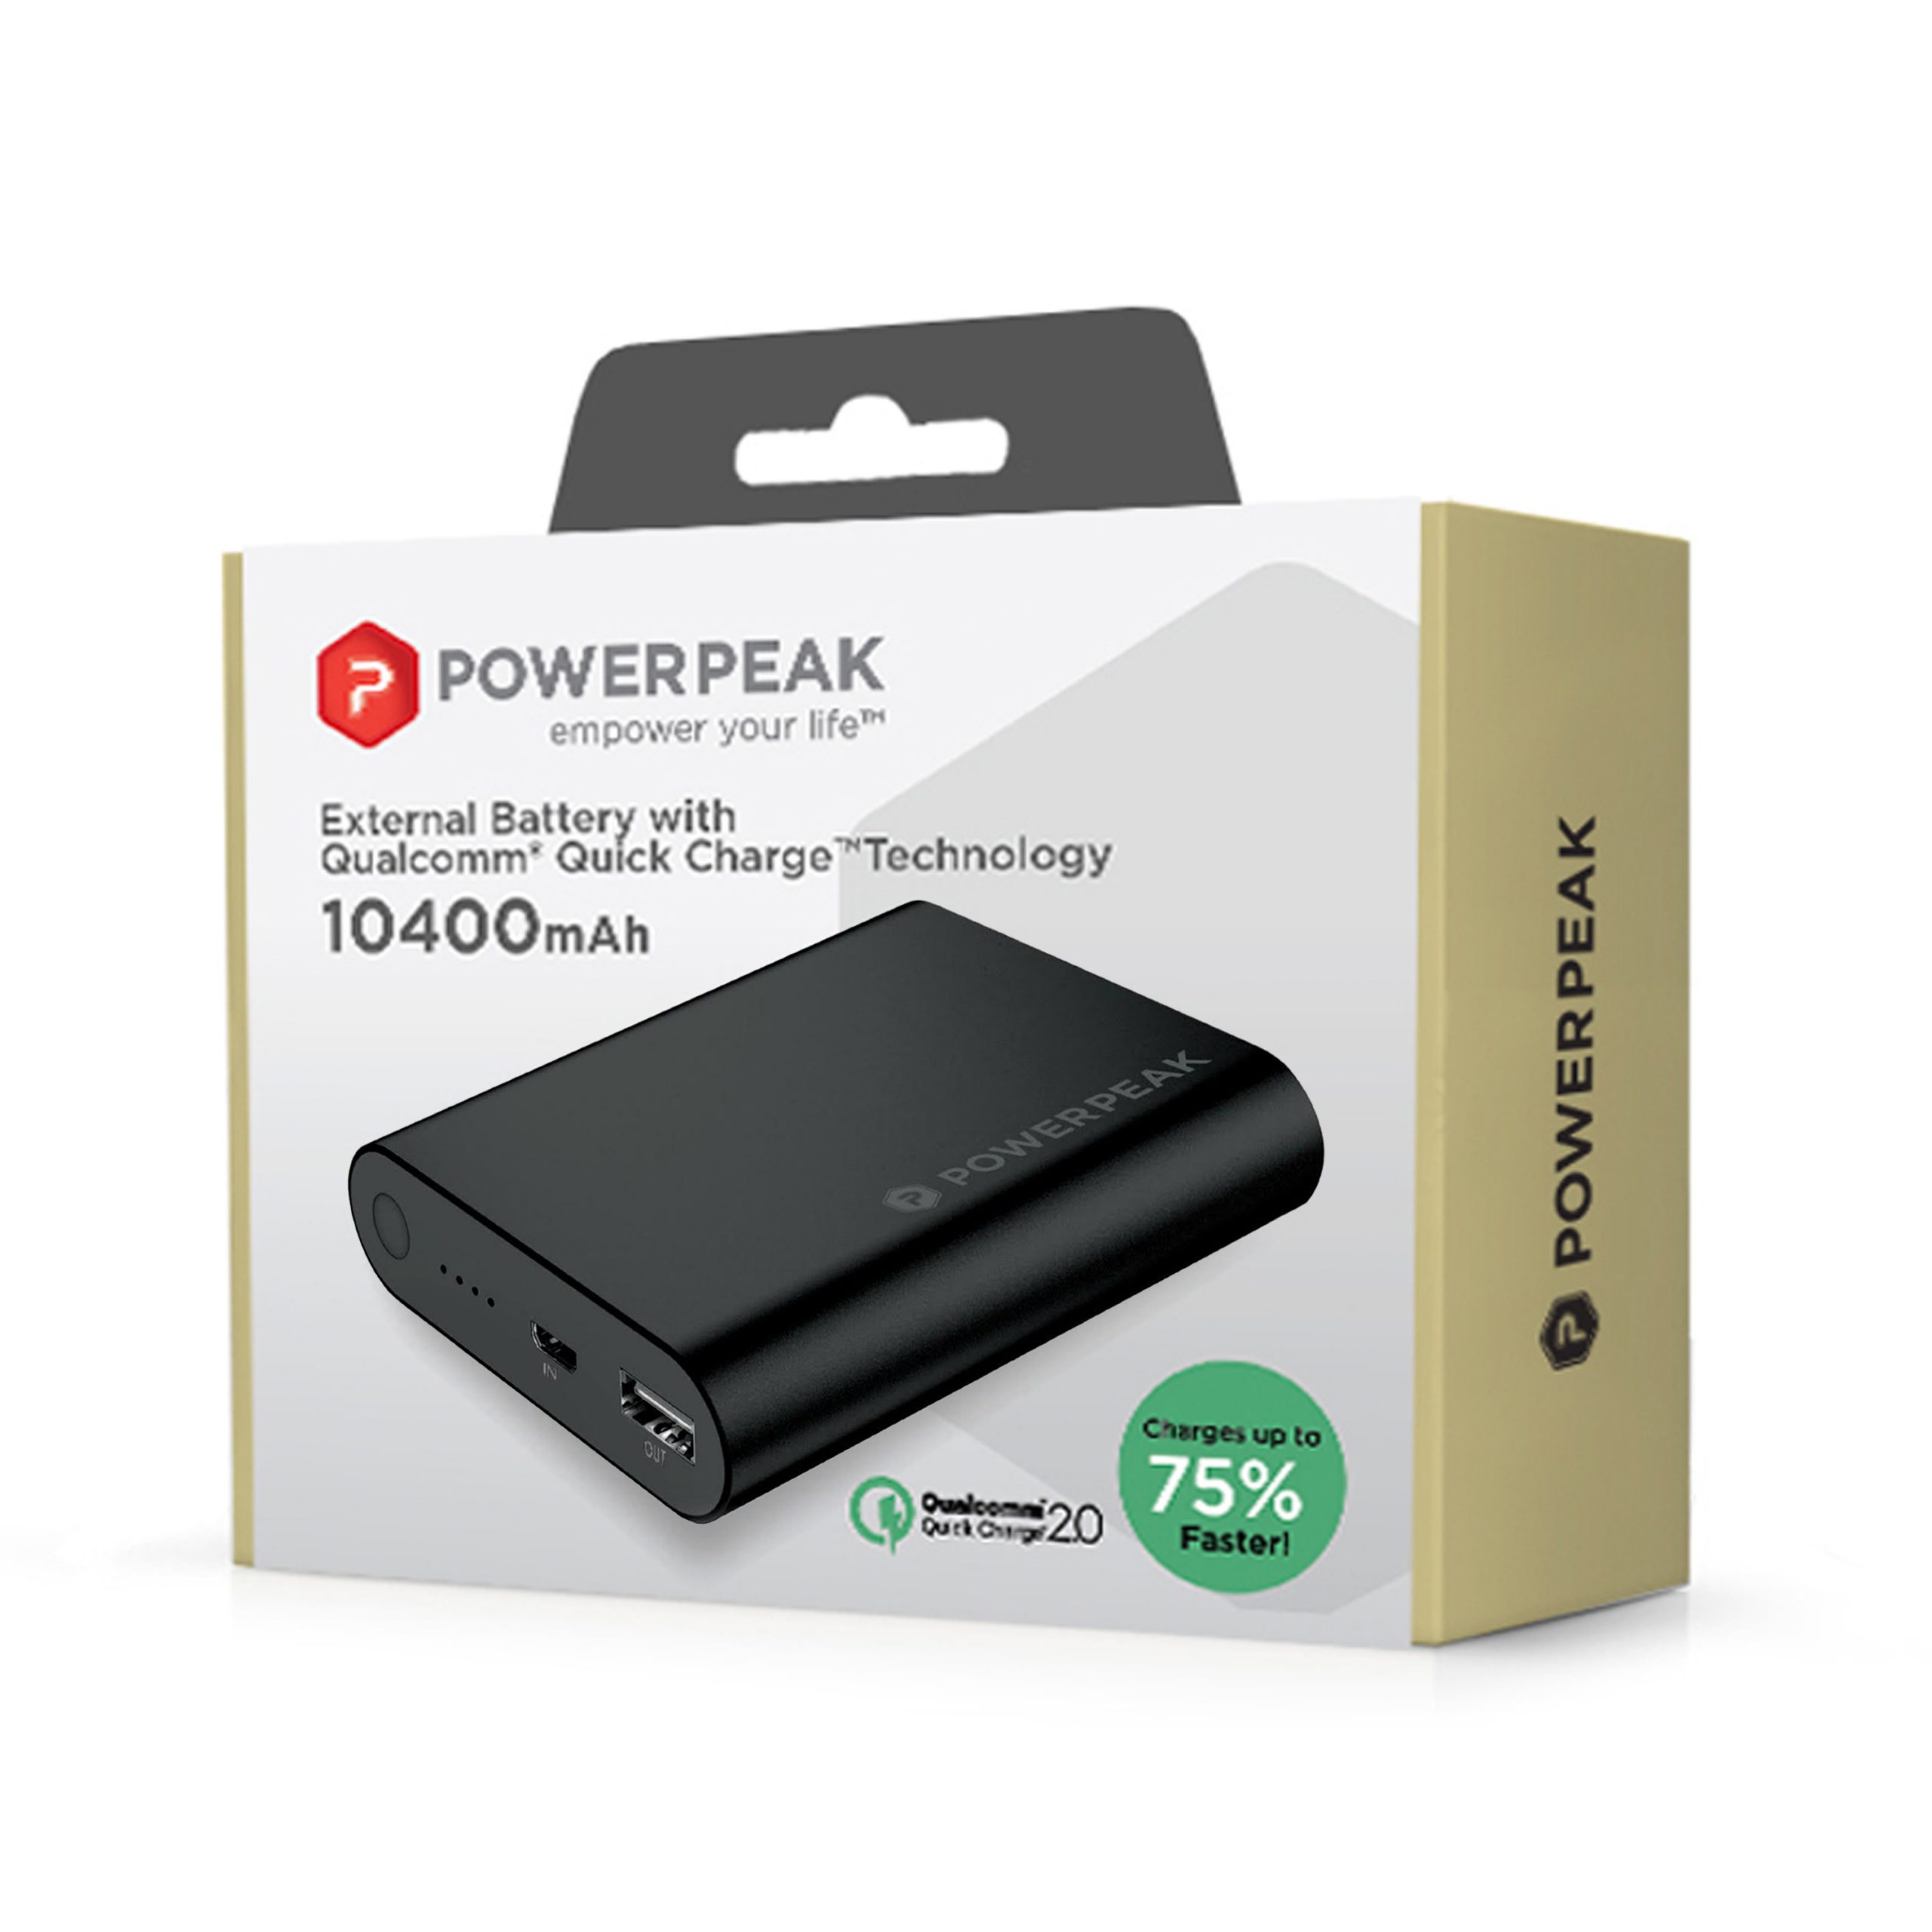 PowerPeak Portable Battery  Pack with Qualcomm Adaptive Fast Charge Technology (10400 mAH 75% Faster) - Black